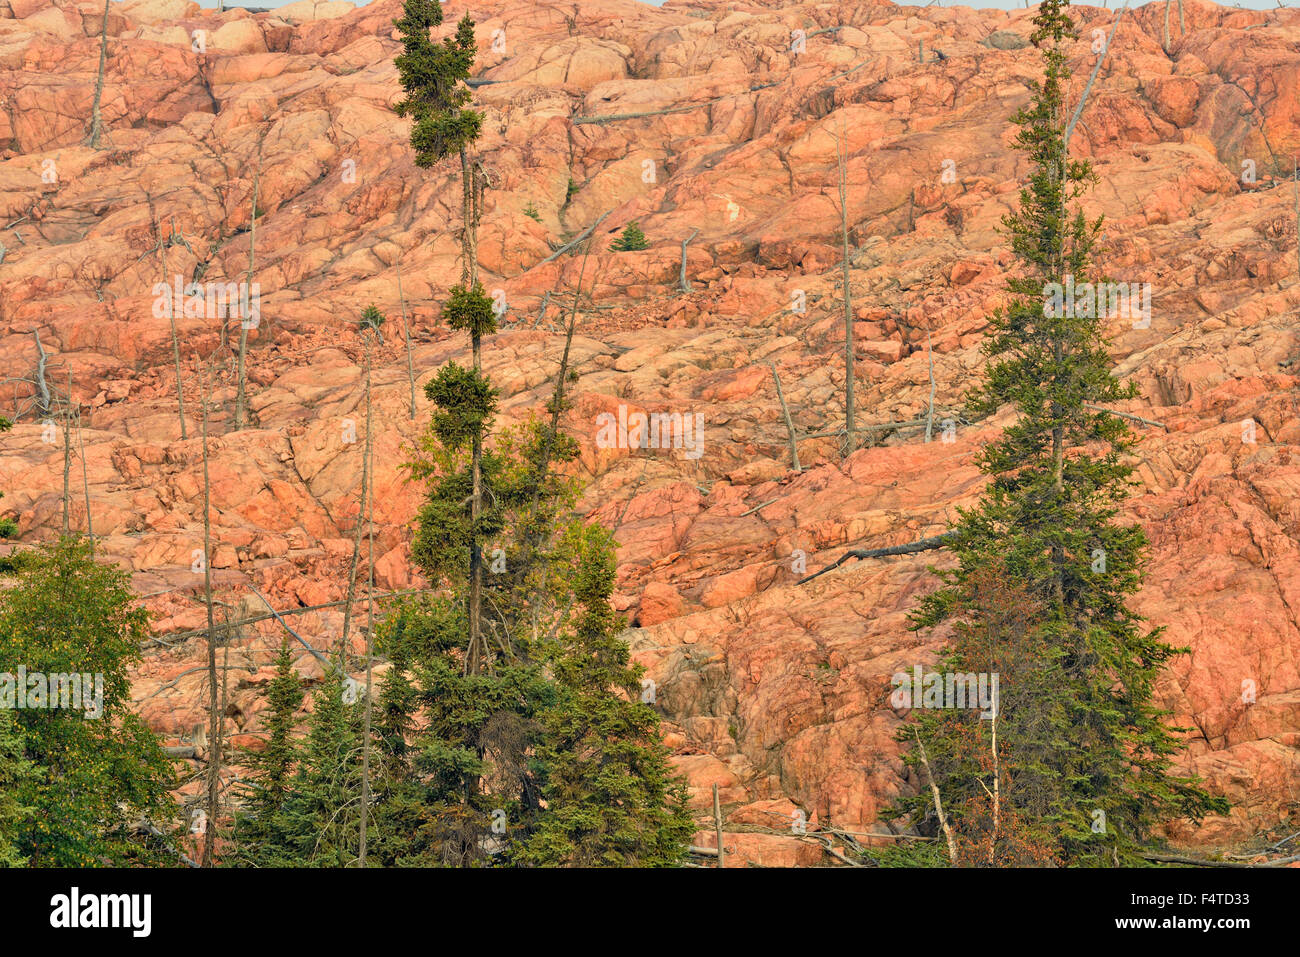 Precambrian rock formations with spruce trees, Yellowknife, Ingraham Trail, Northwest Territories, Canada Stock Photo